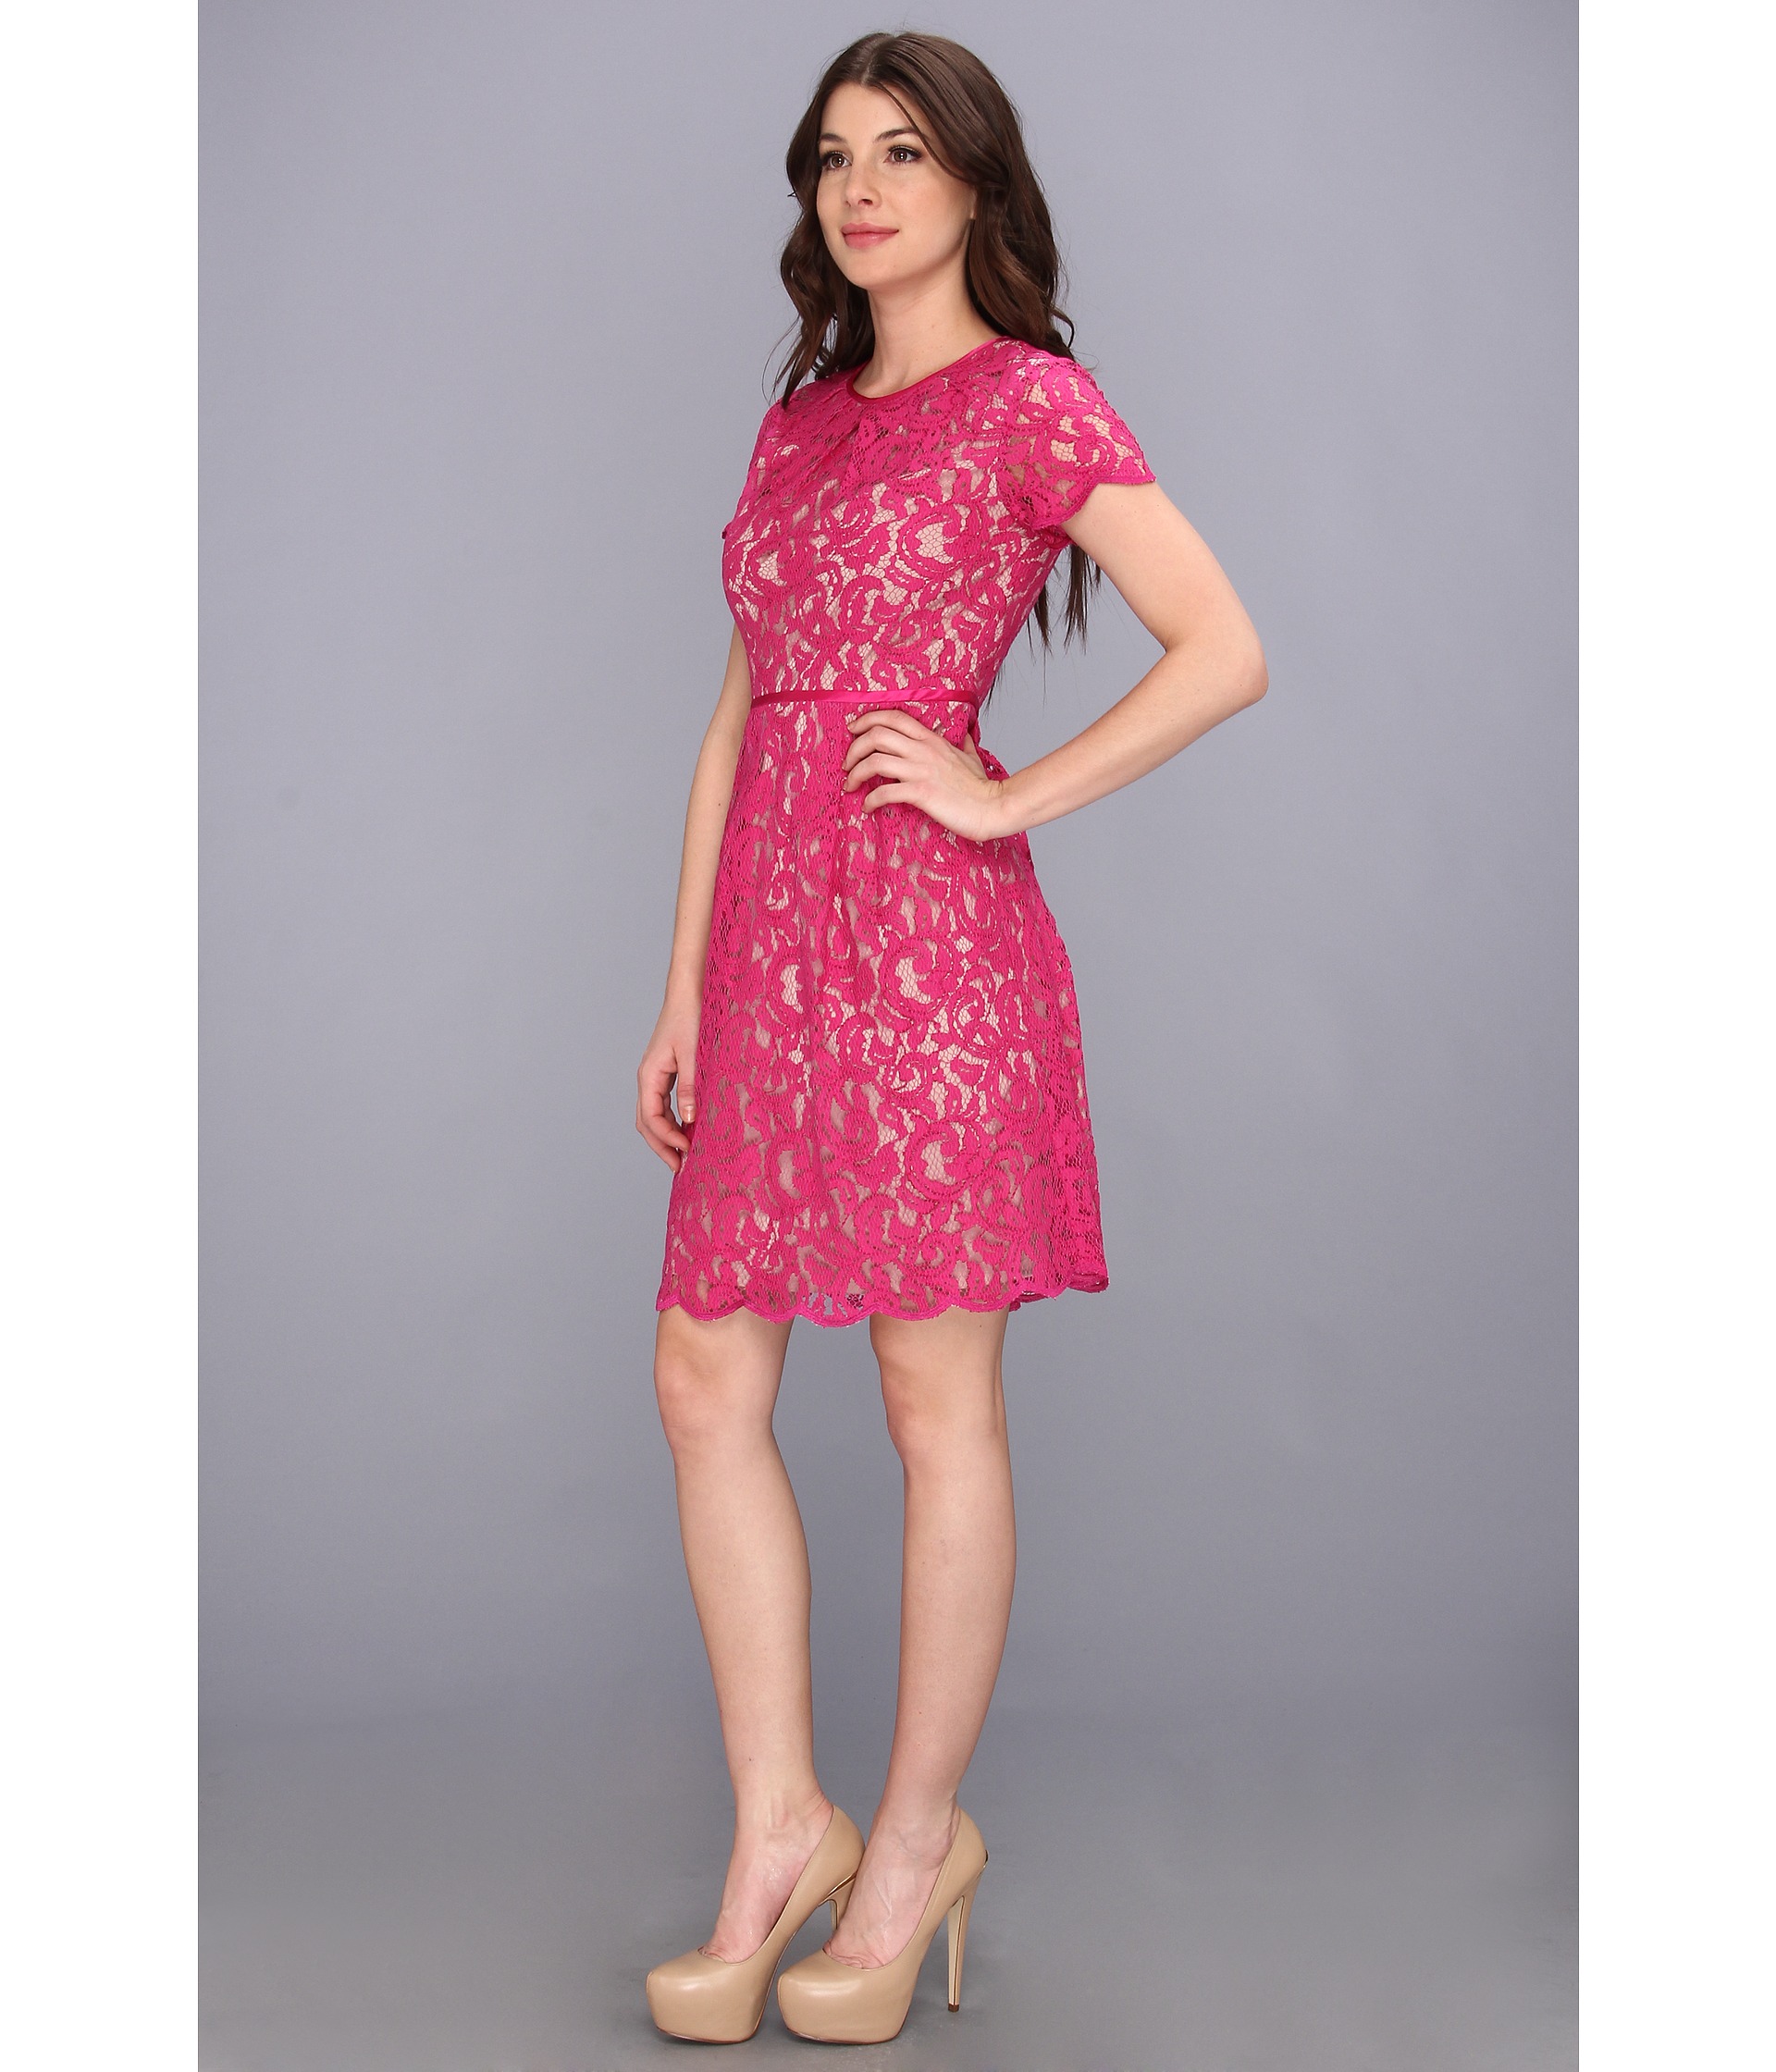 Adrianna Papell Pleat Scallop Lace Dress